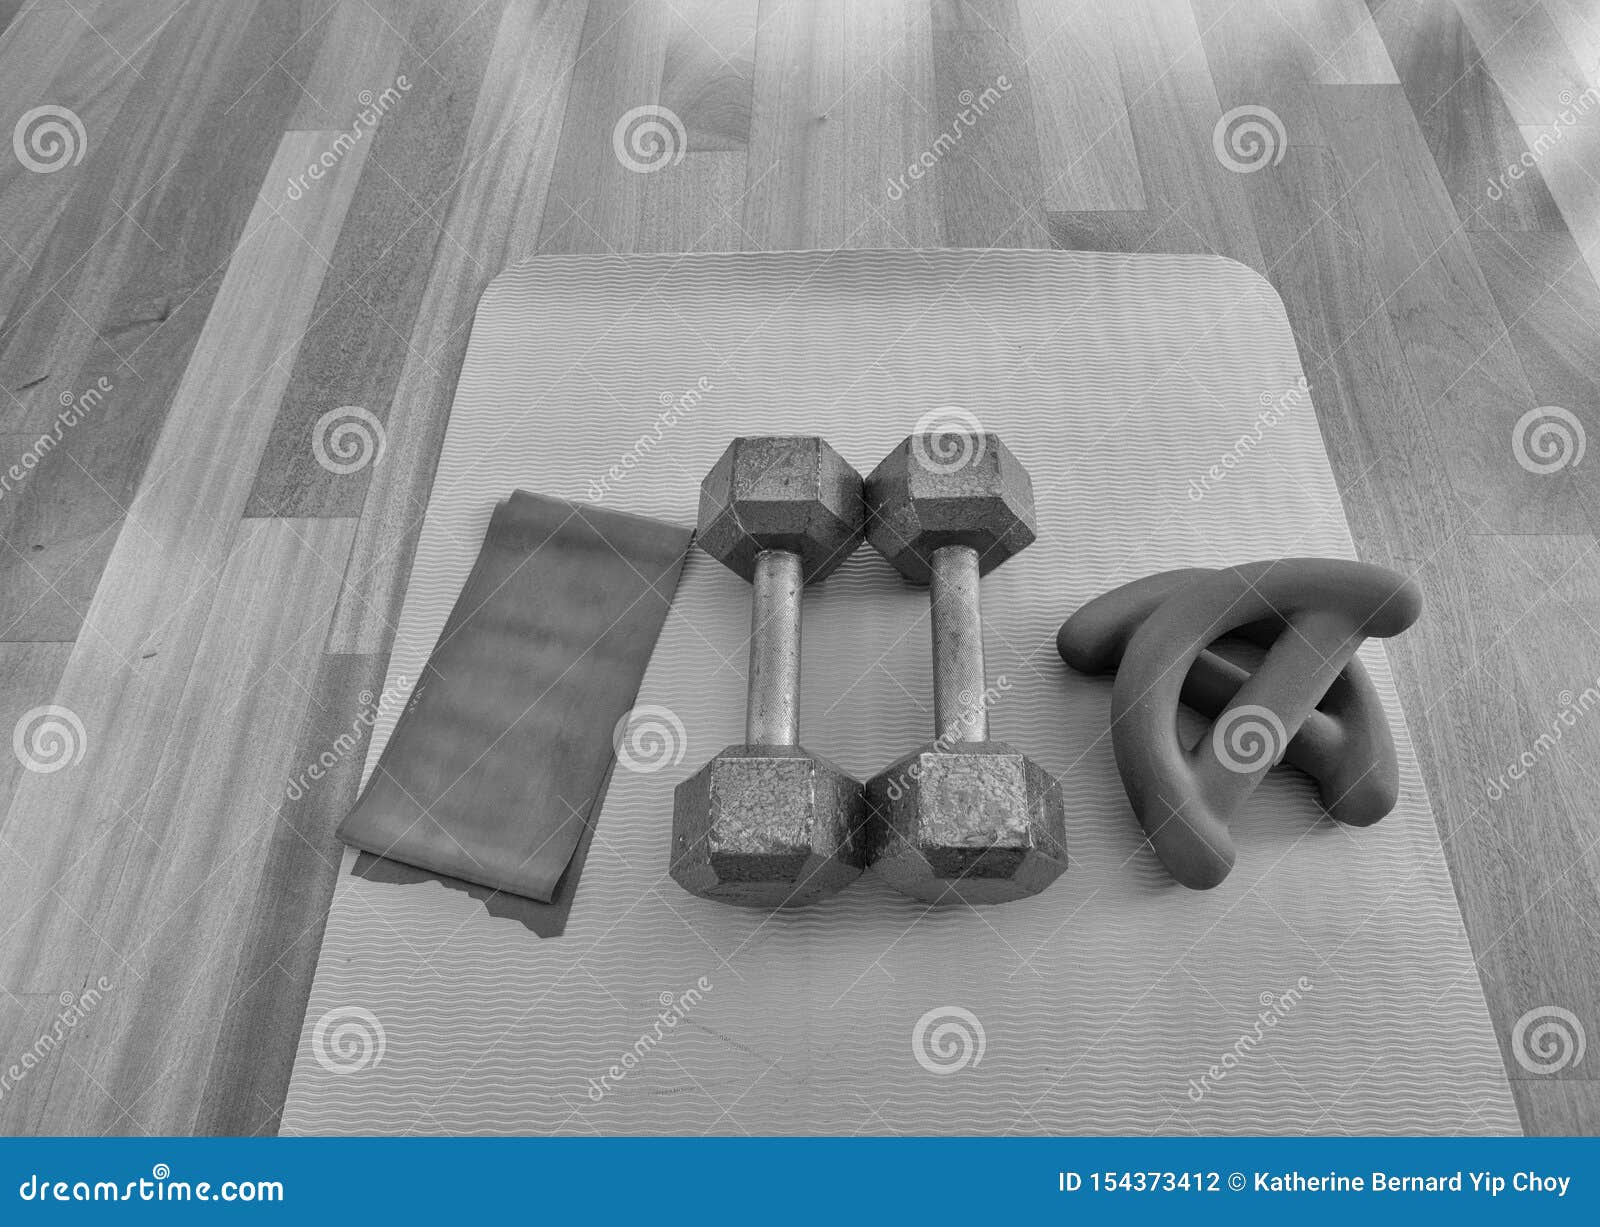 Black And White Version Of Overhead View Of A Pair Of Dumbbells